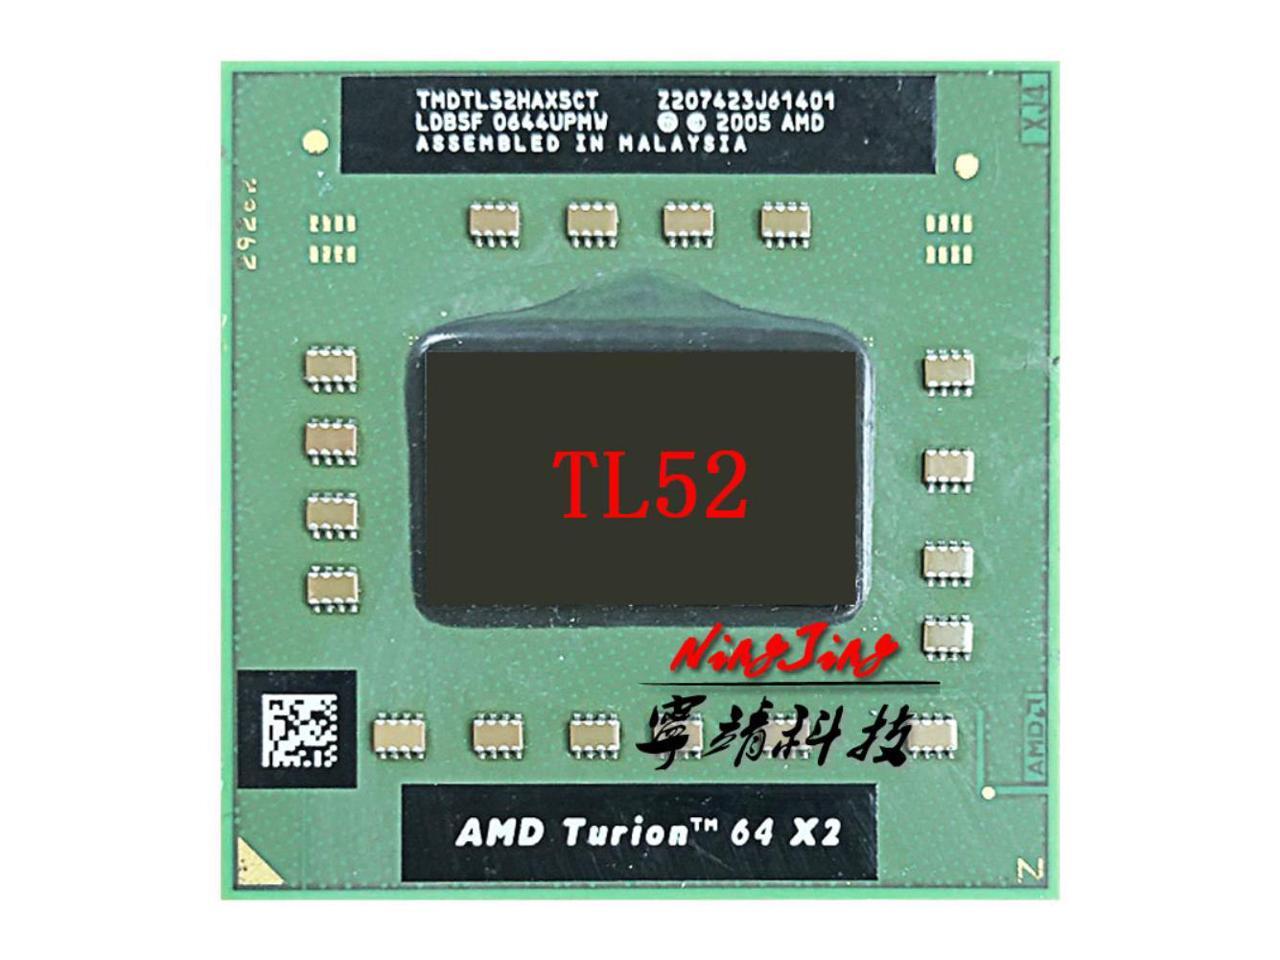 AMD Turion 64 X2 TL-52 Mobile 638 S1G1 TMDTL52HAX5CT  Dual Core Used Tested 